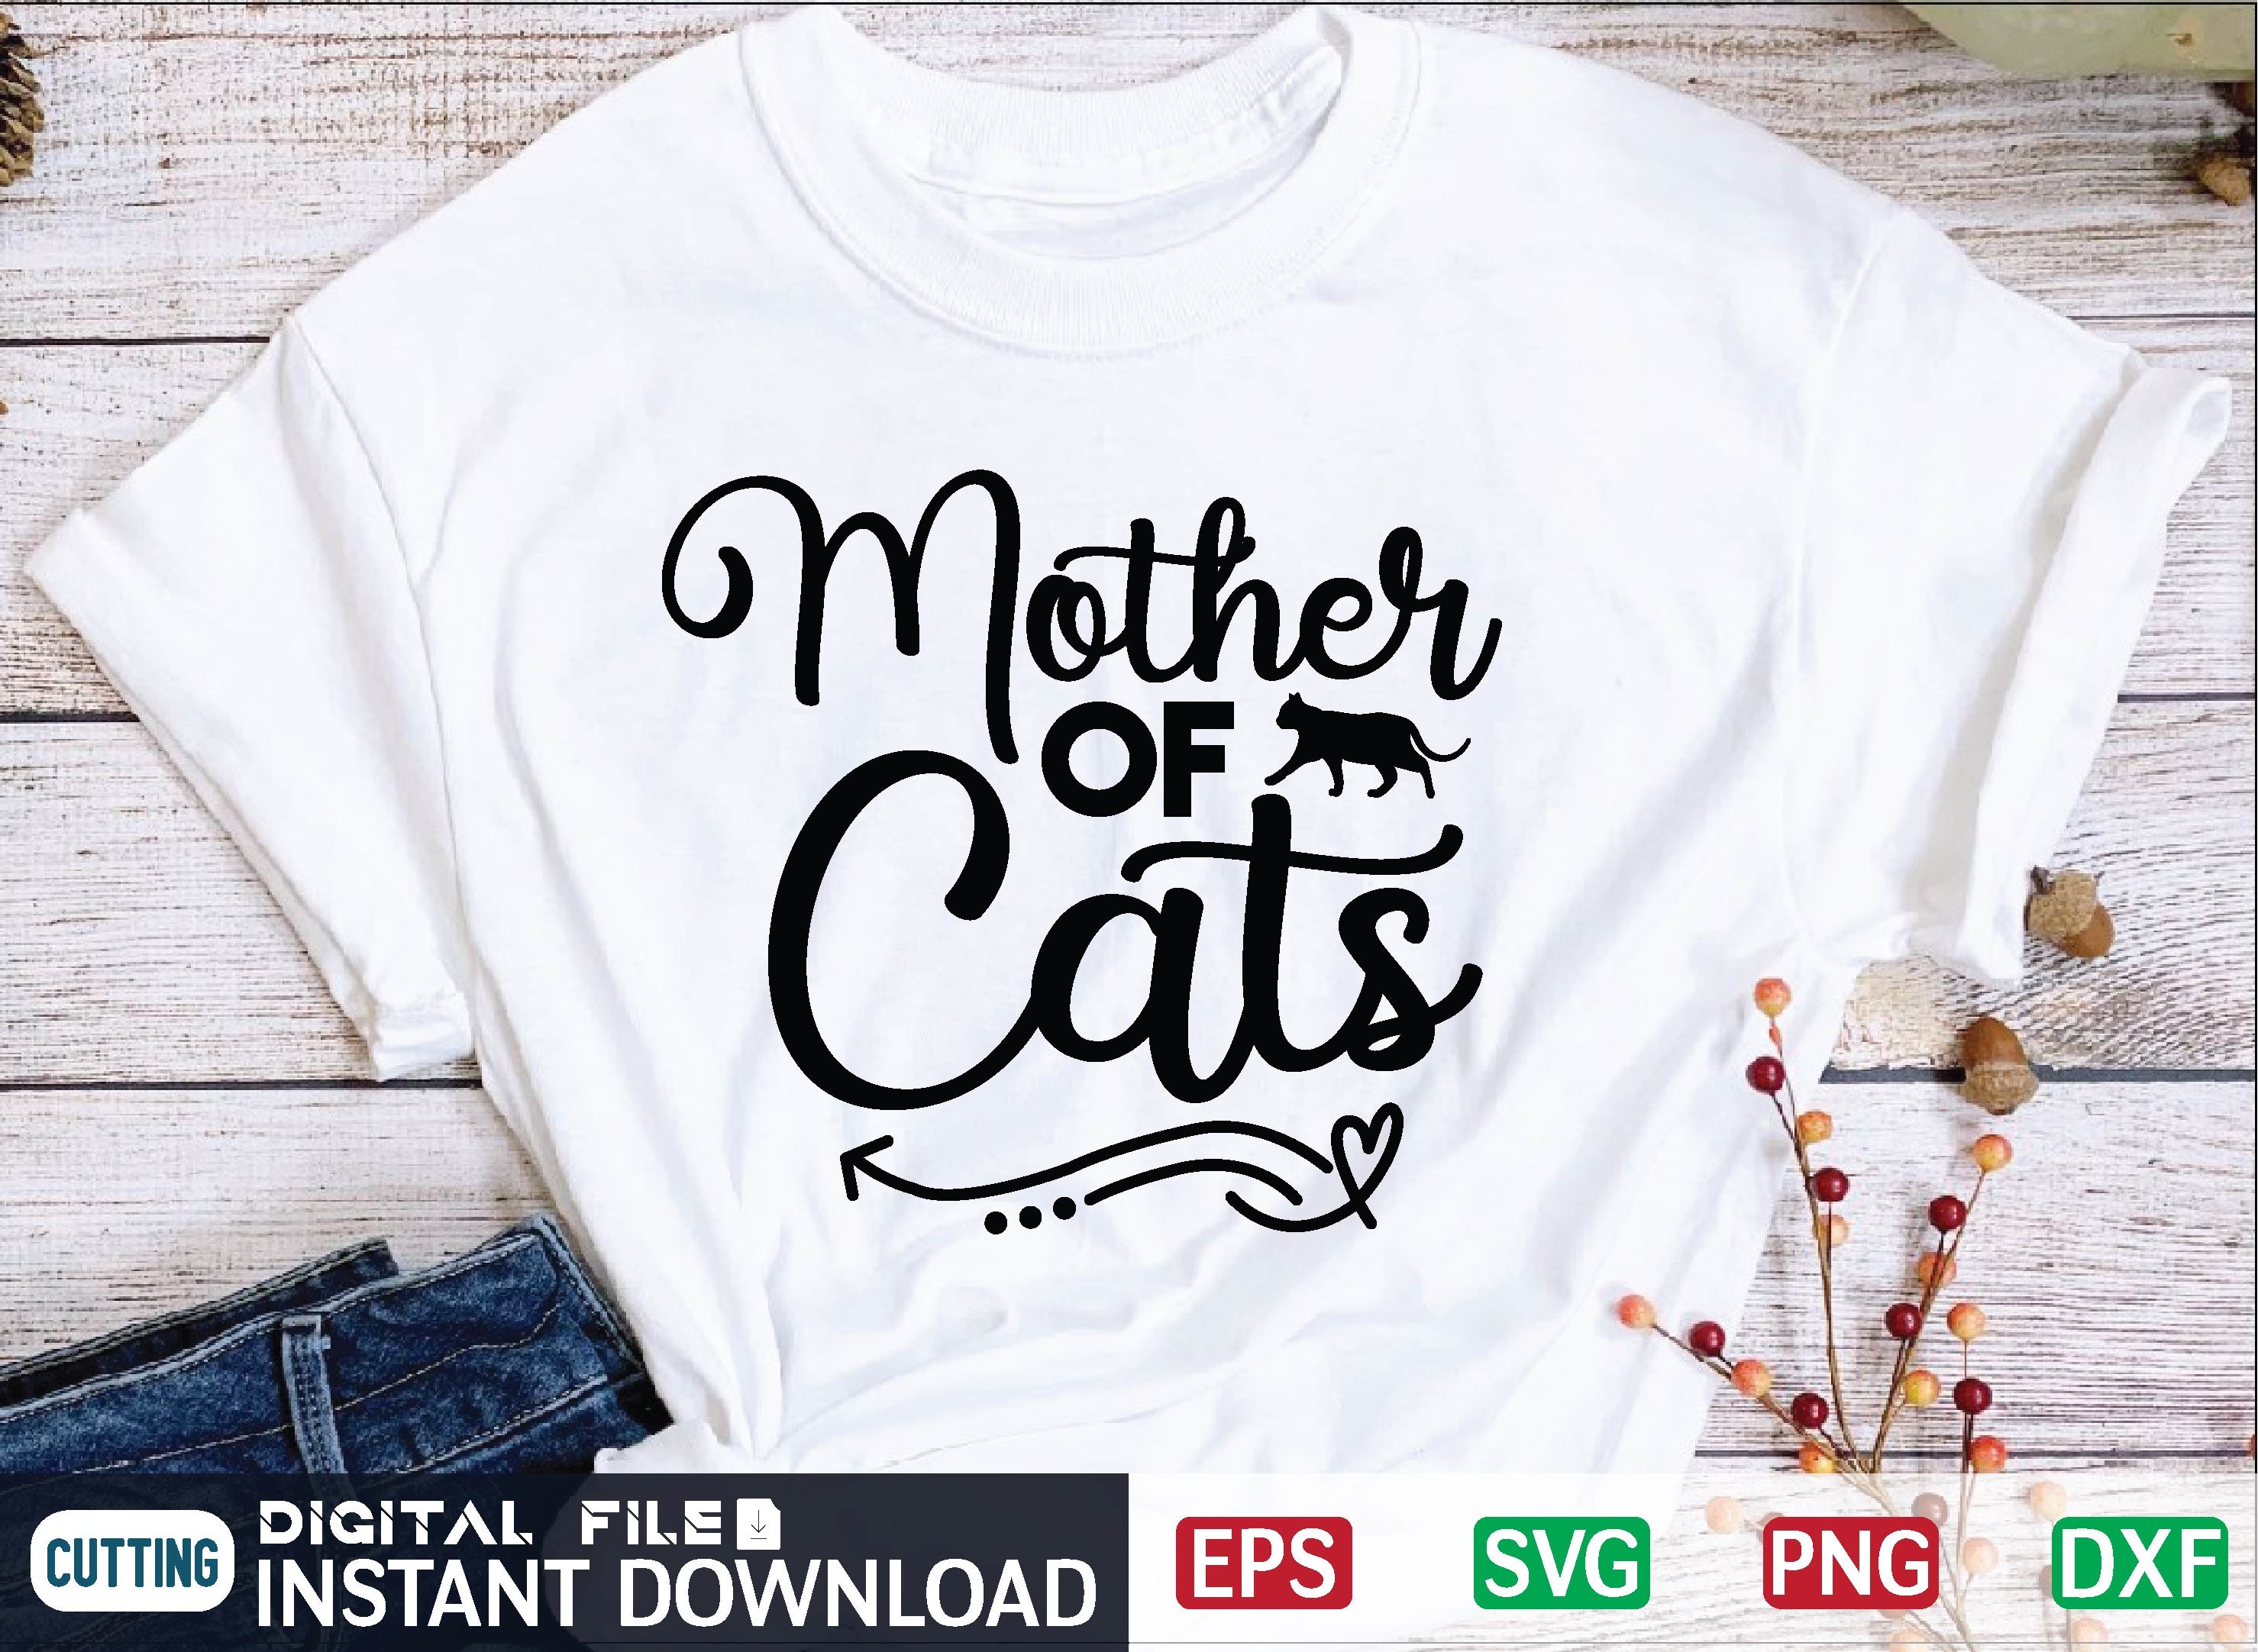 Mother of Cats Svg Graphic by CraftsSvg30 · Creative Fabrica